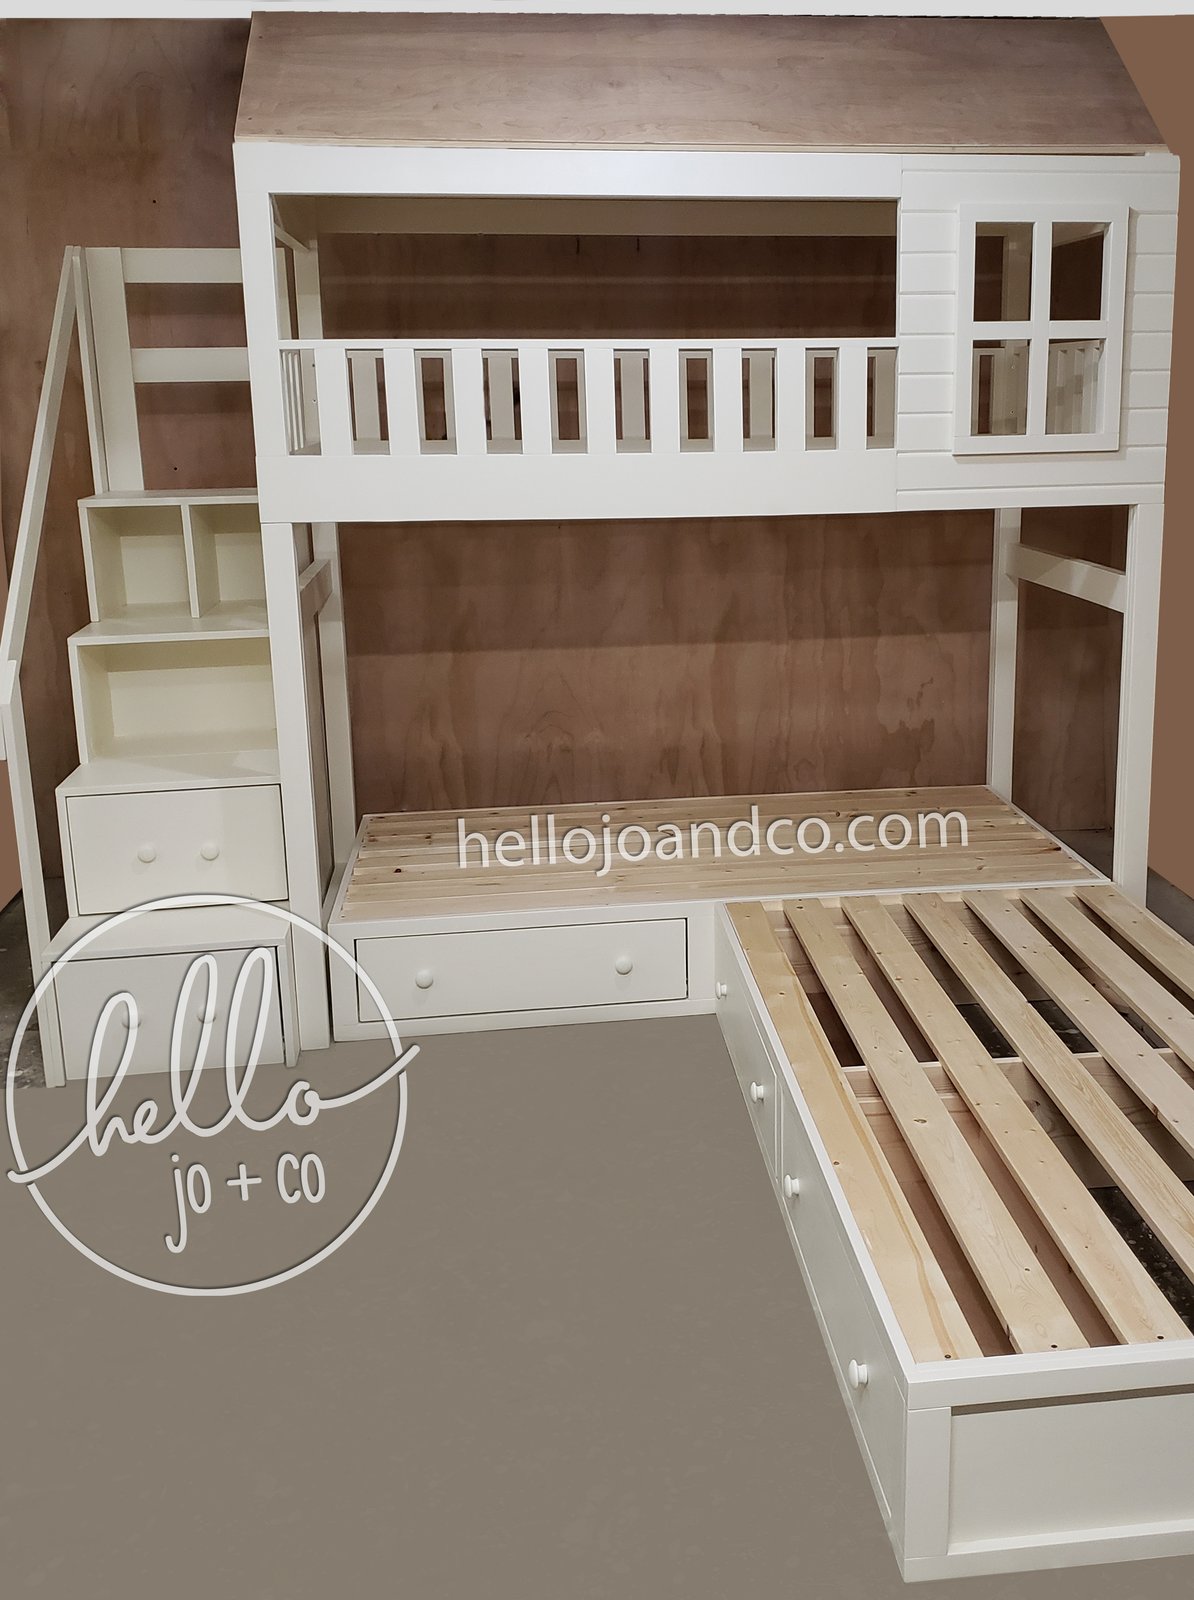 triple bed bunk bed